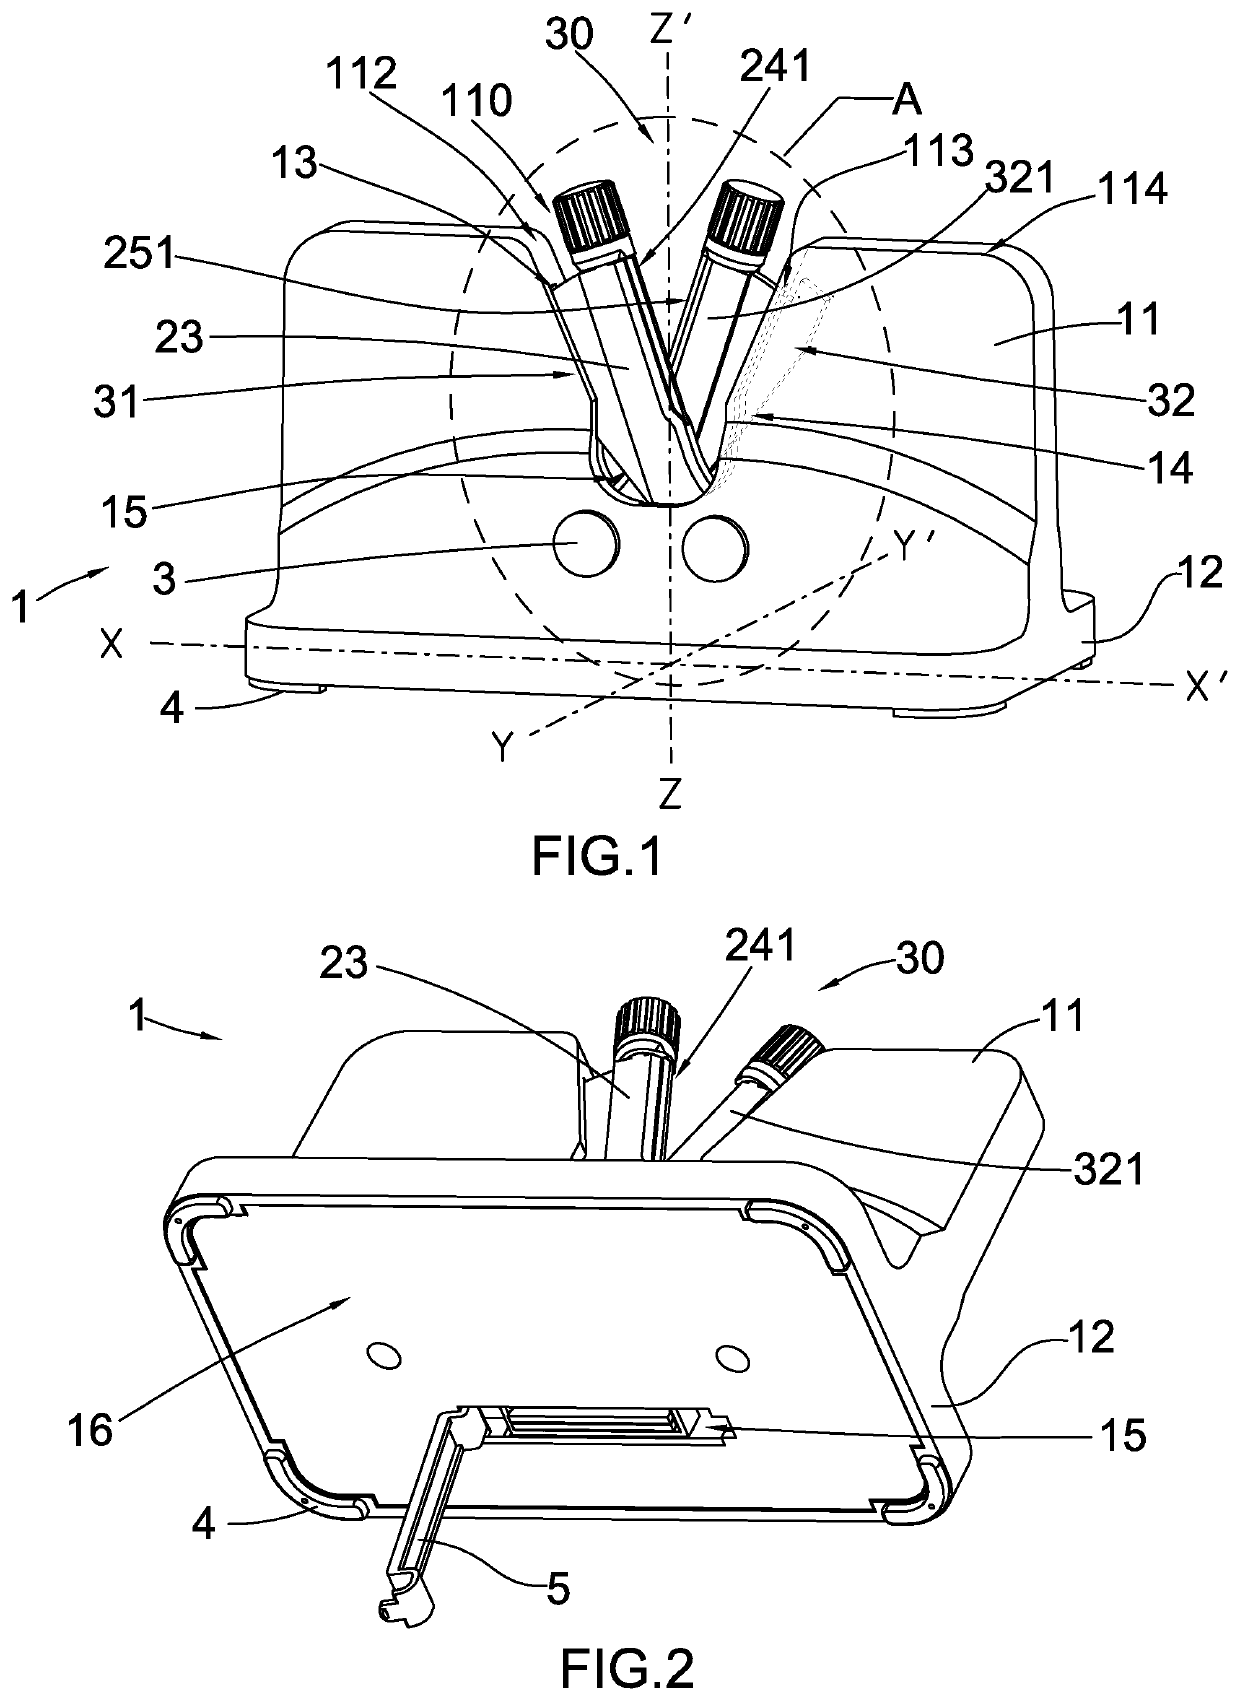 Knife Sharpening Device